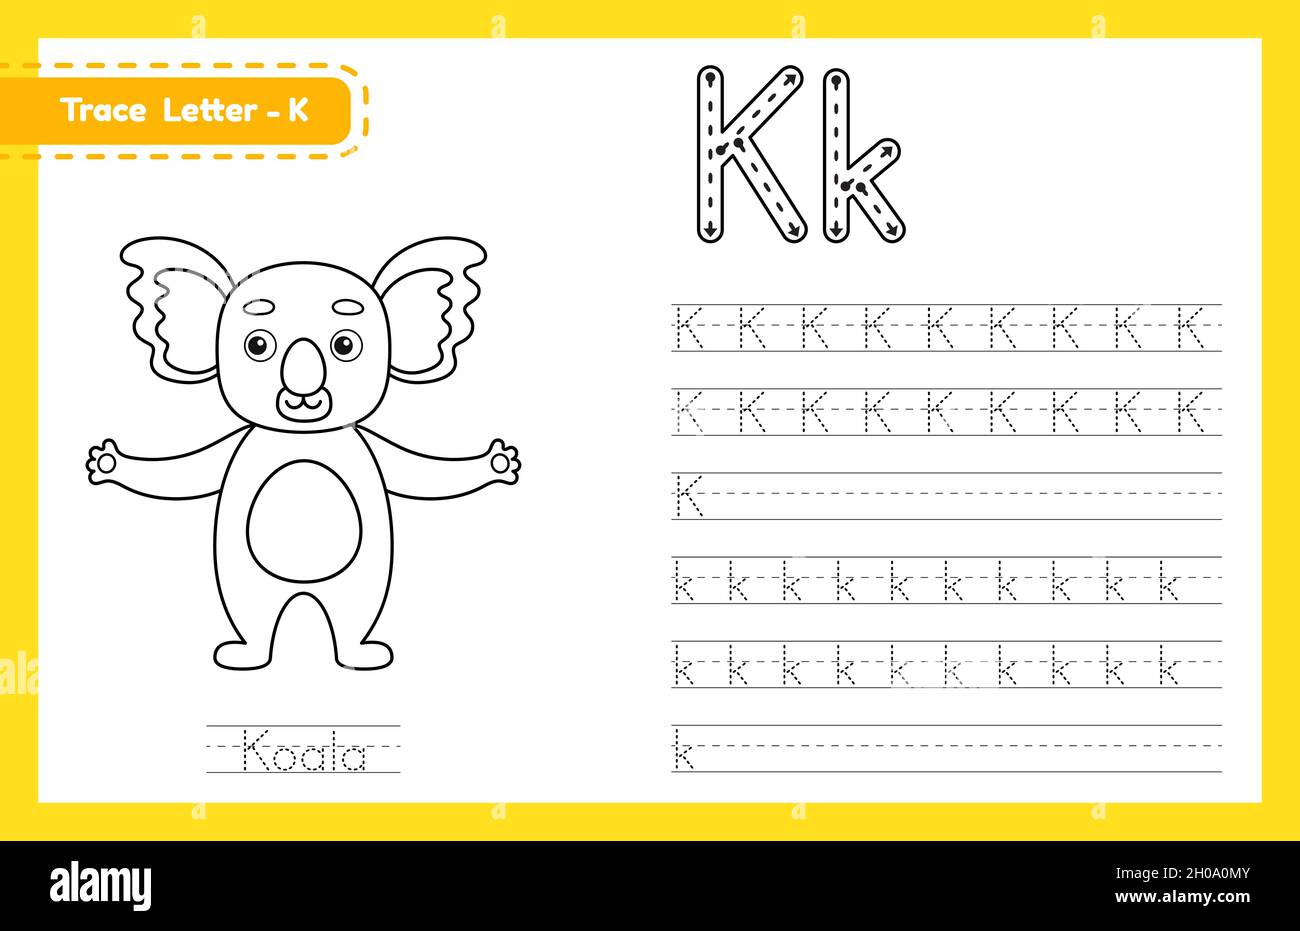 trace letter k uppercase and lowercase alphabet tracing practice preschool worksheet for kids learning english with cute cartoon animal coloring boo stock vector image art alamy